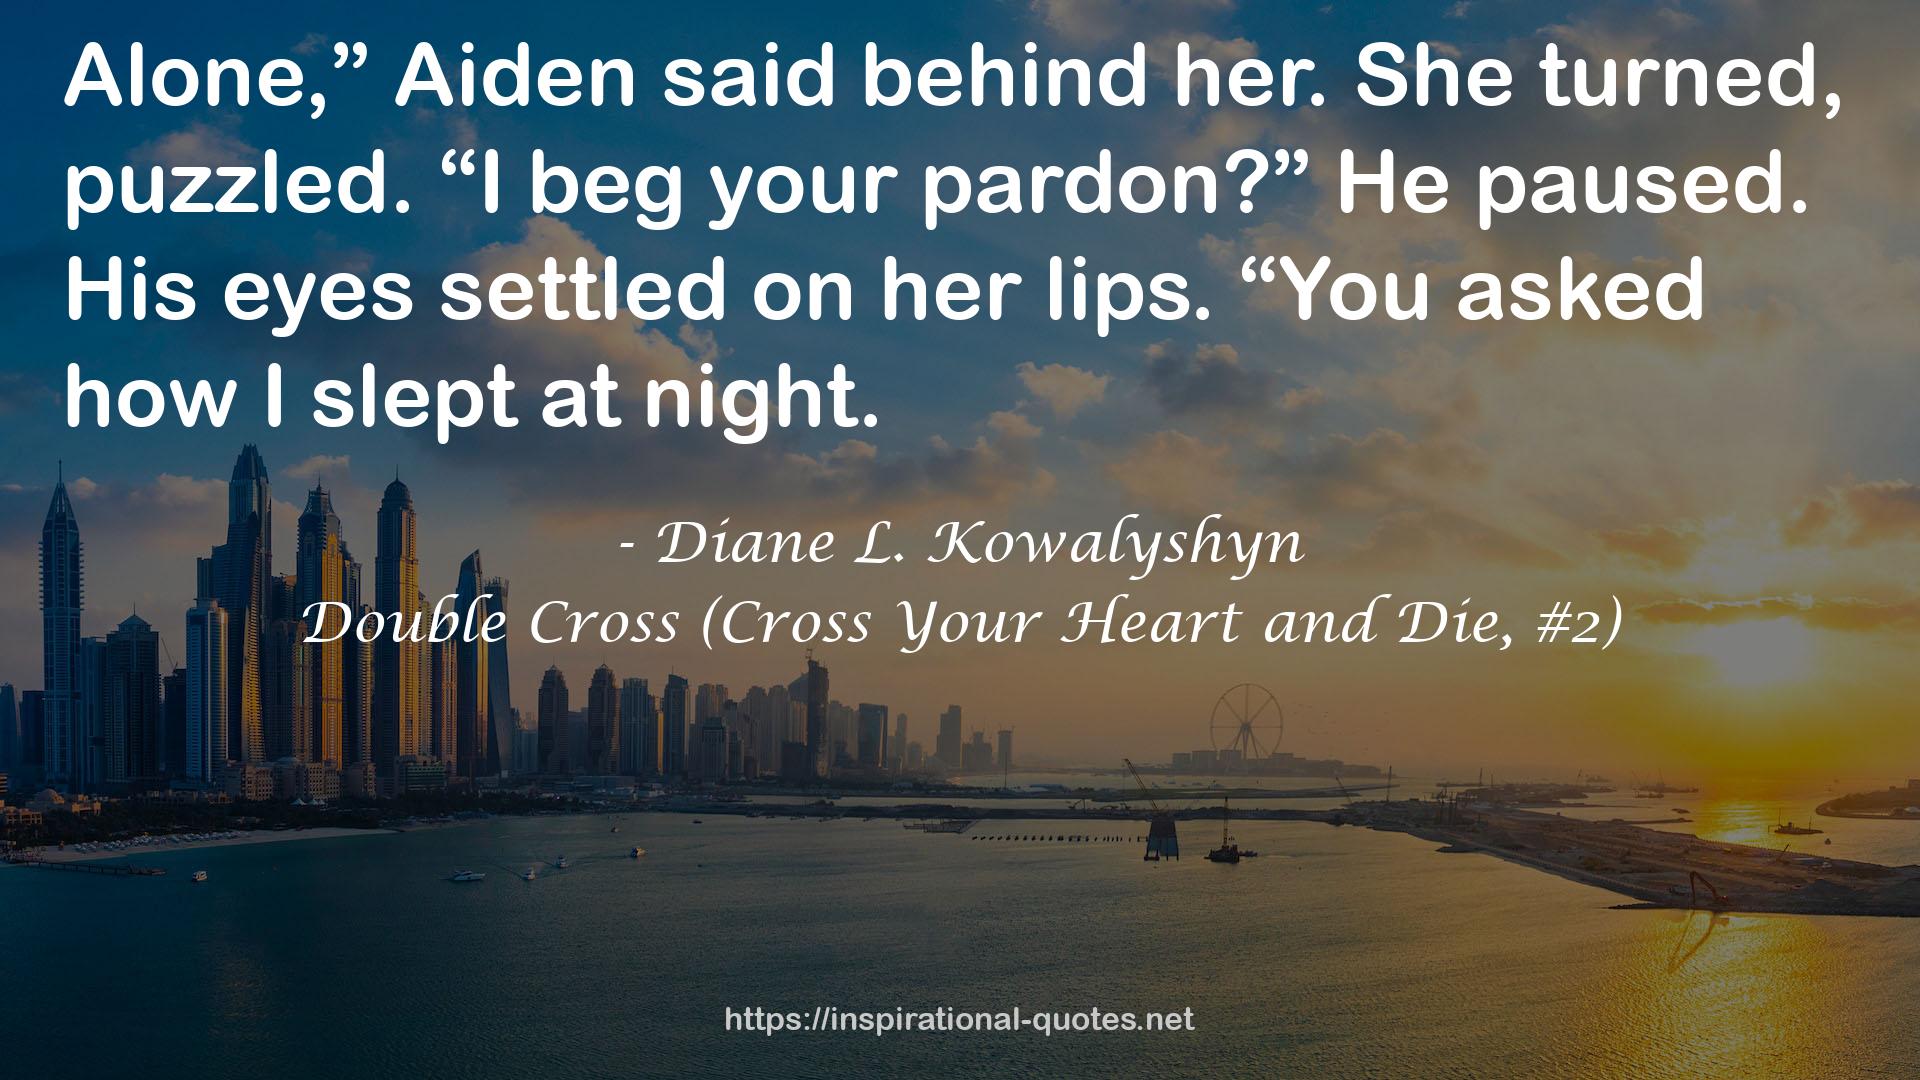 Double Cross (Cross Your Heart and Die, #2) QUOTES